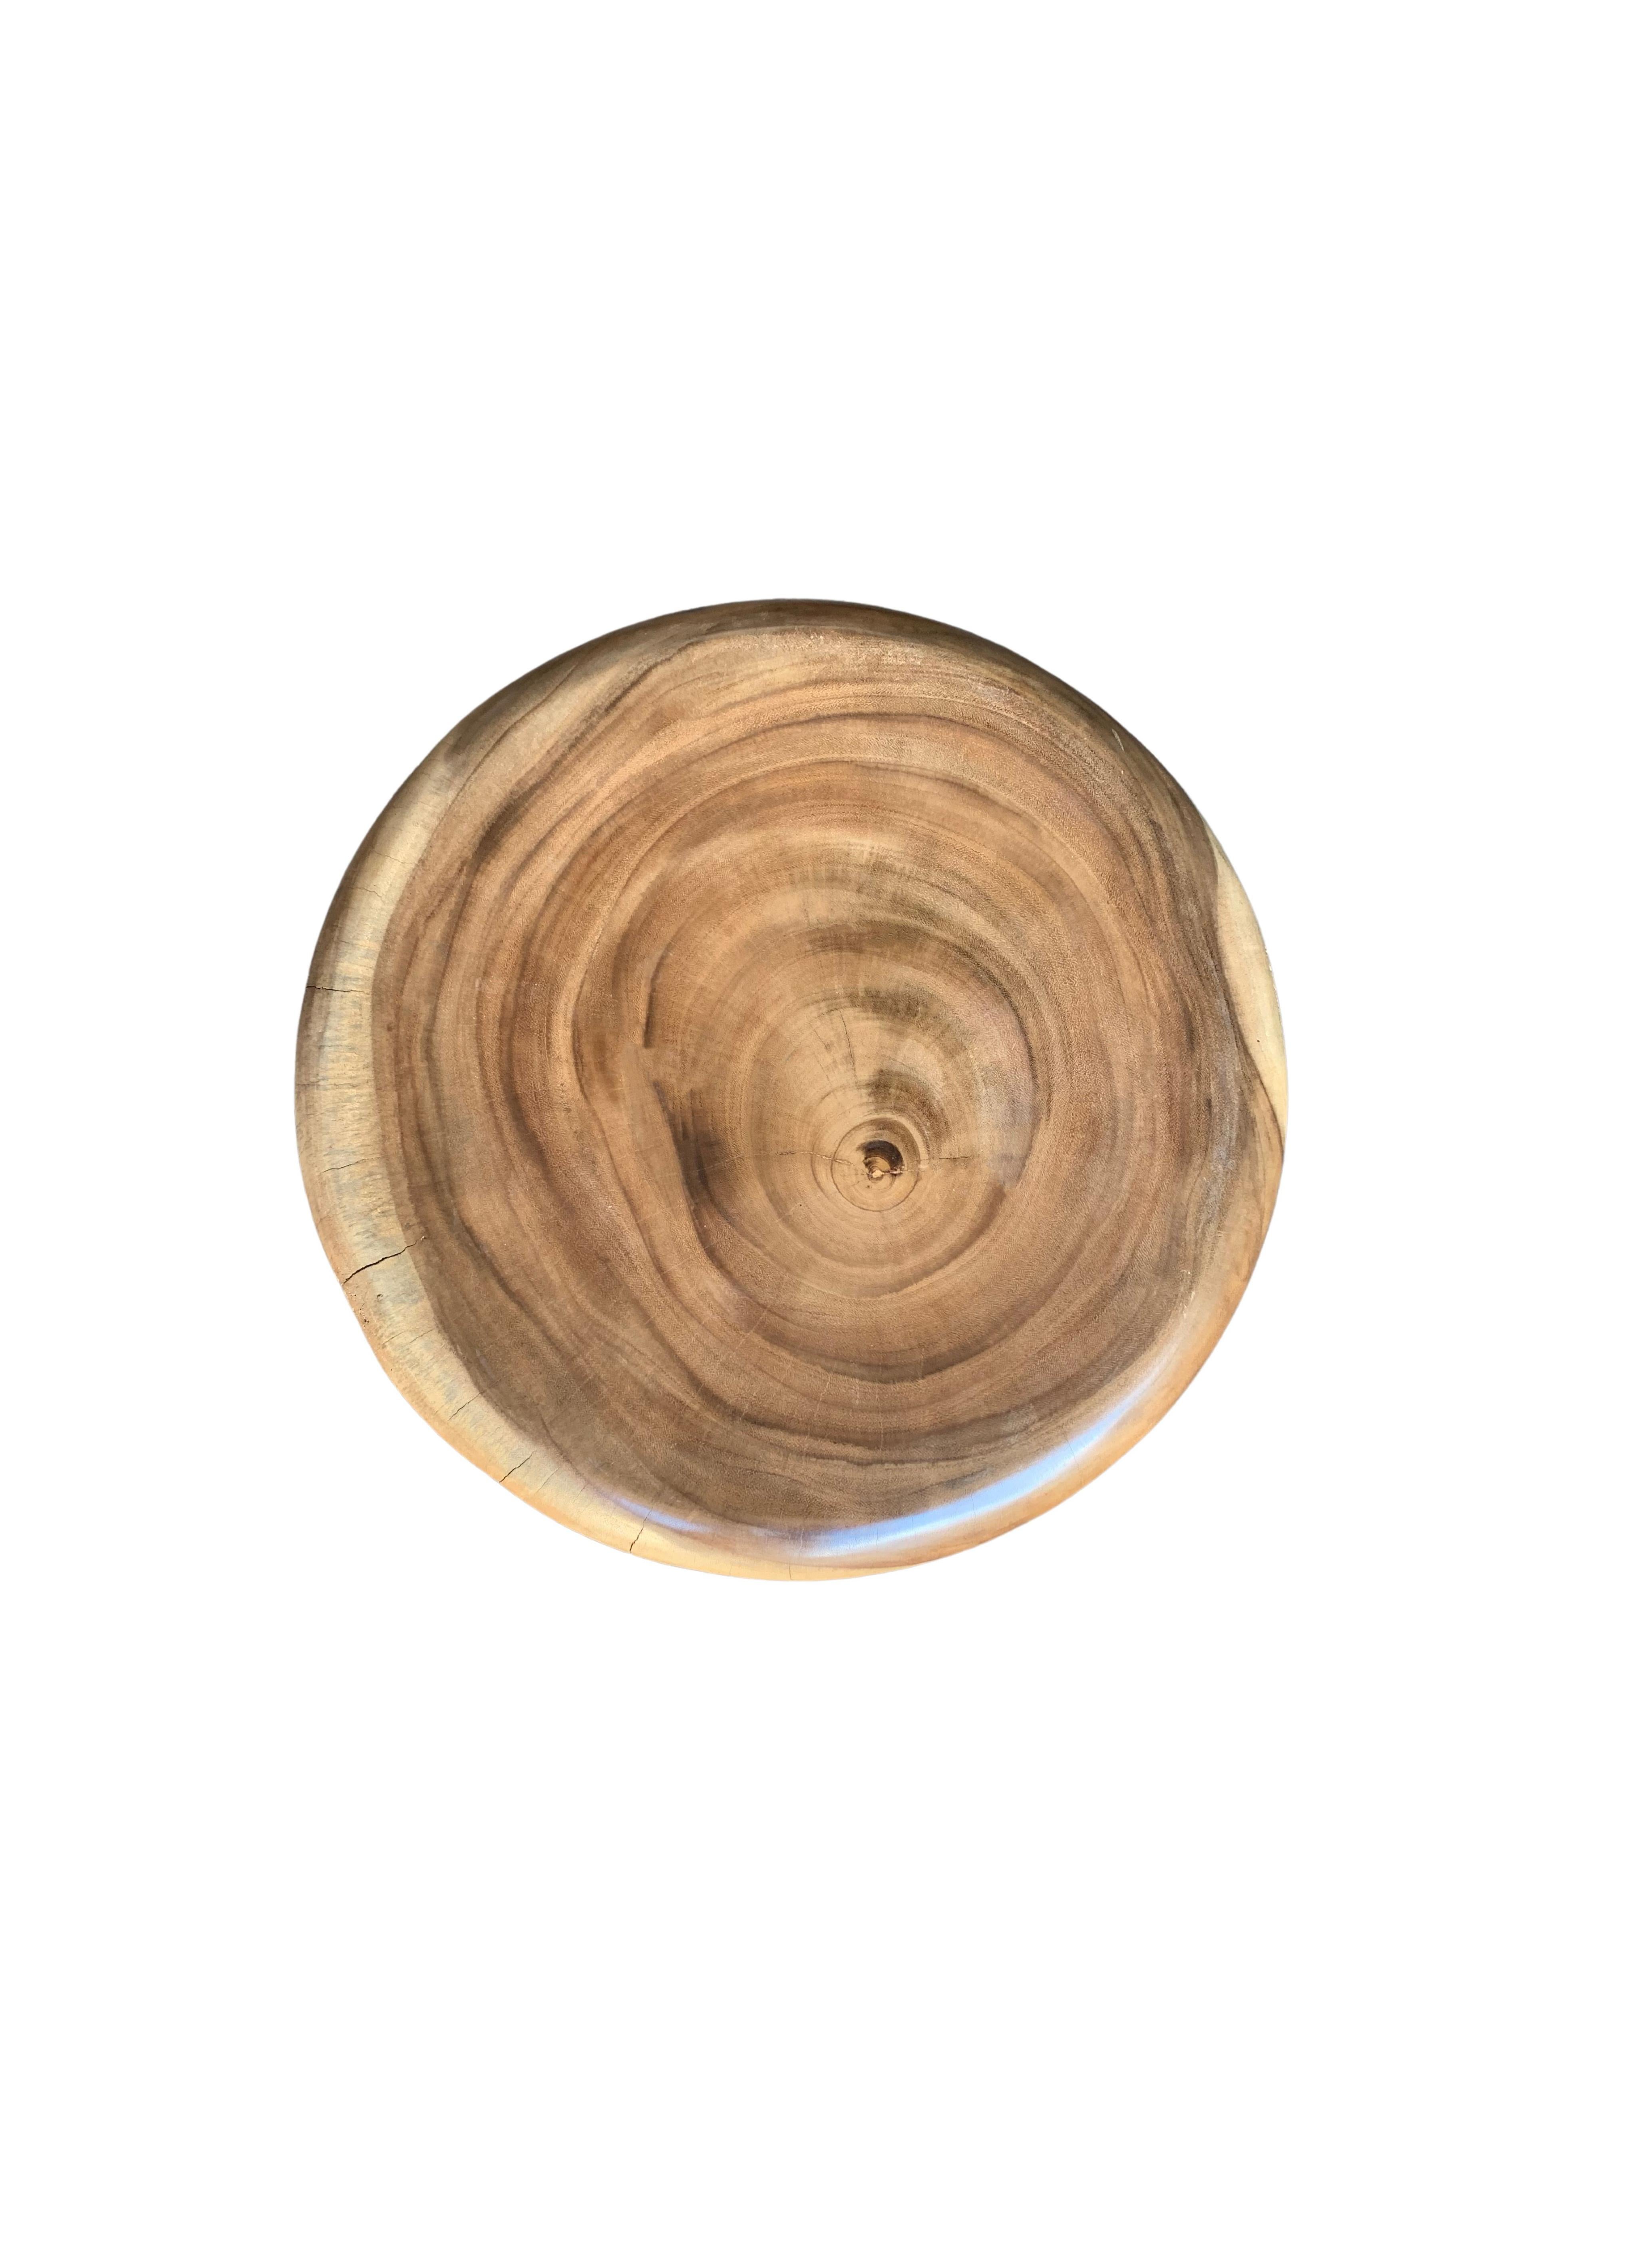 Organic Modern Sculptural Side Table Crafted from Mango Wood For Sale